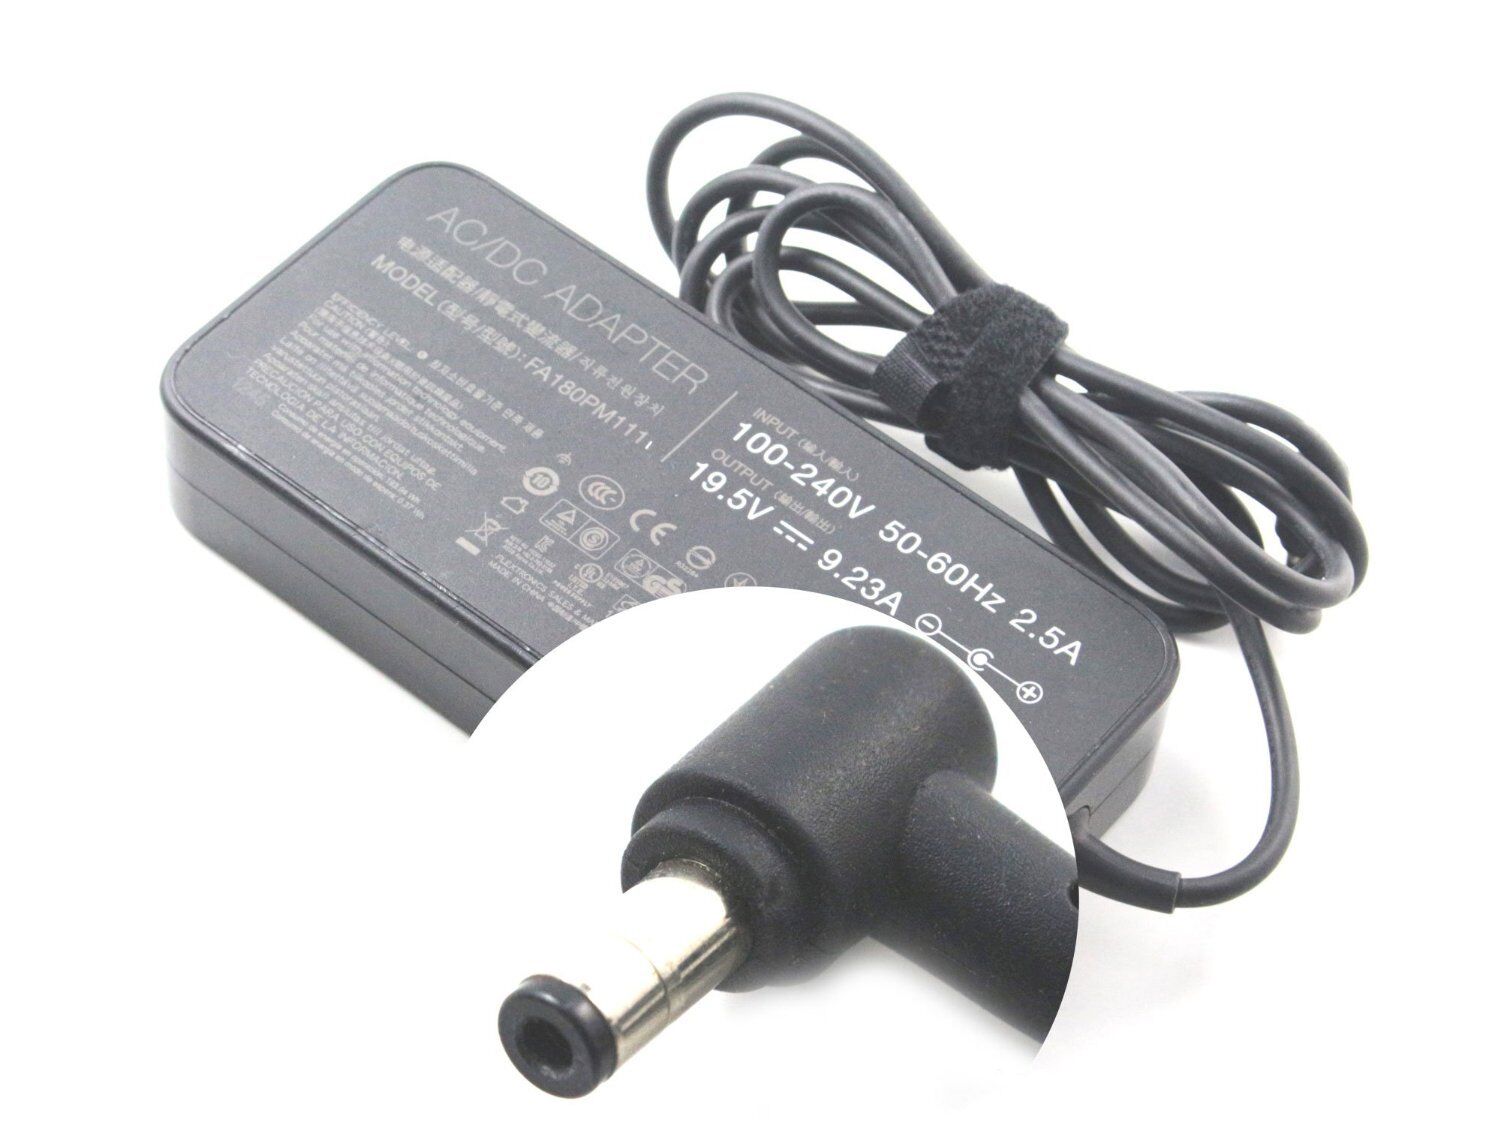 NEW Asus 19.5V 9.23A 180W AC Adapter Charger ADP-180MB F,ADP-180HB D,FA180PM111